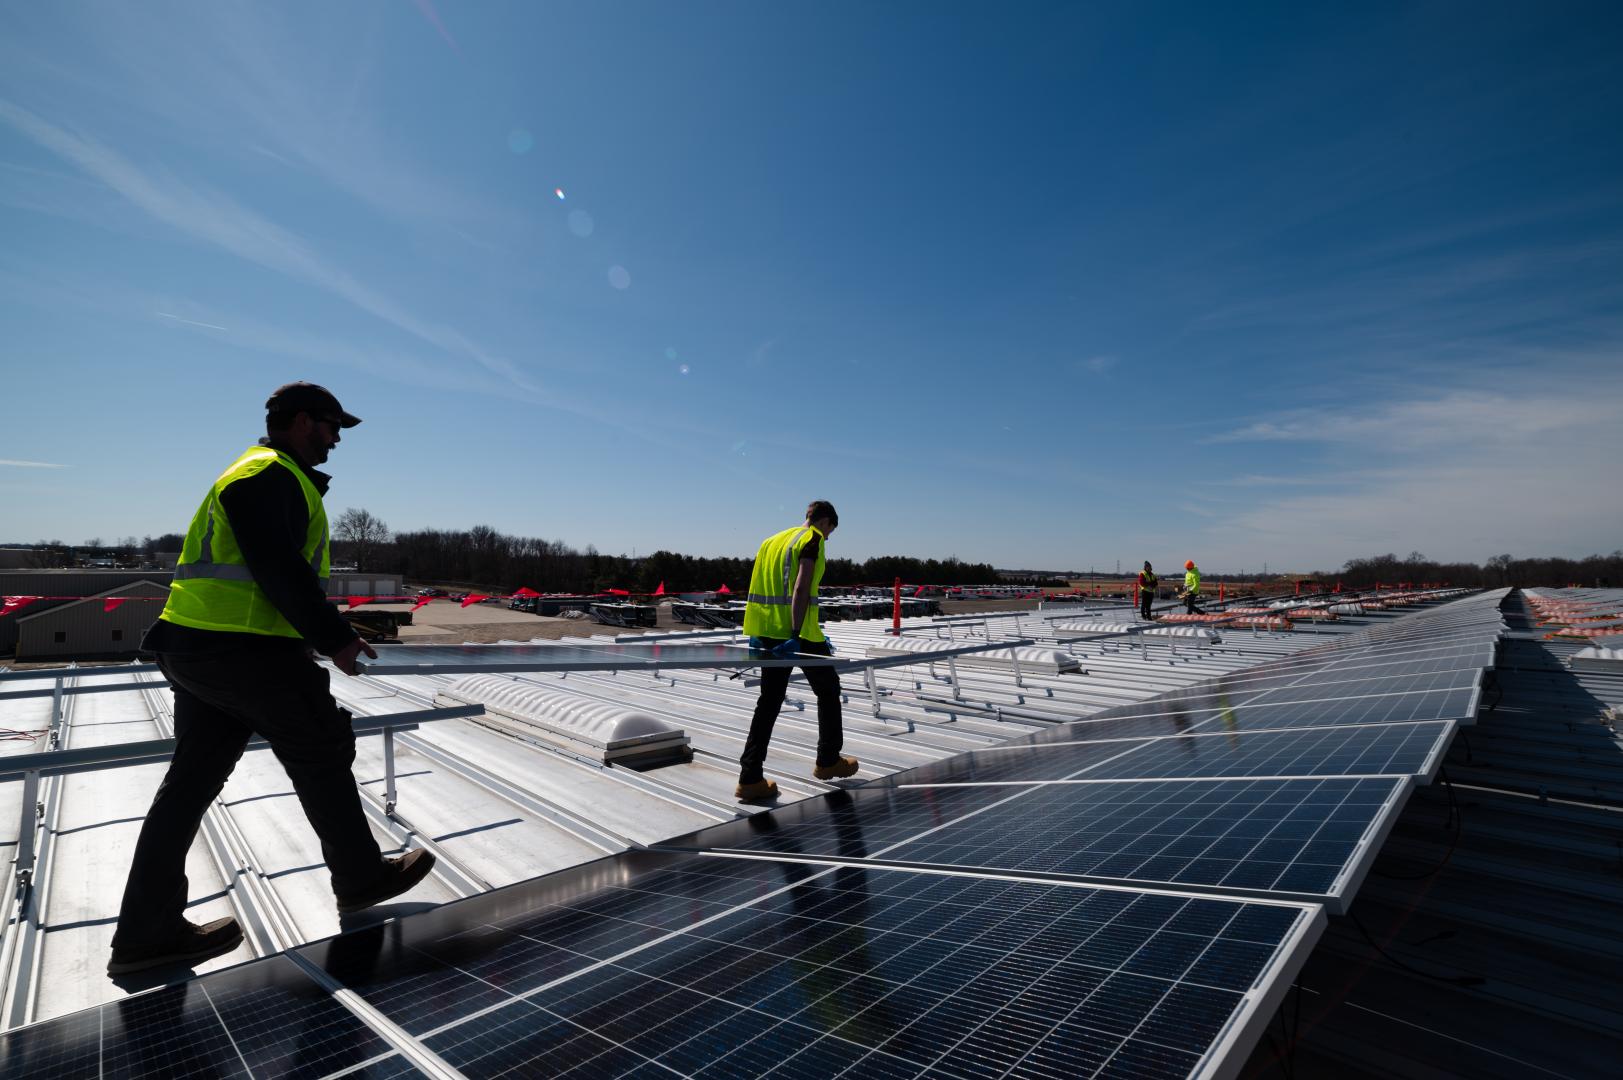 Jayco Launches Massive Campus Solar Project